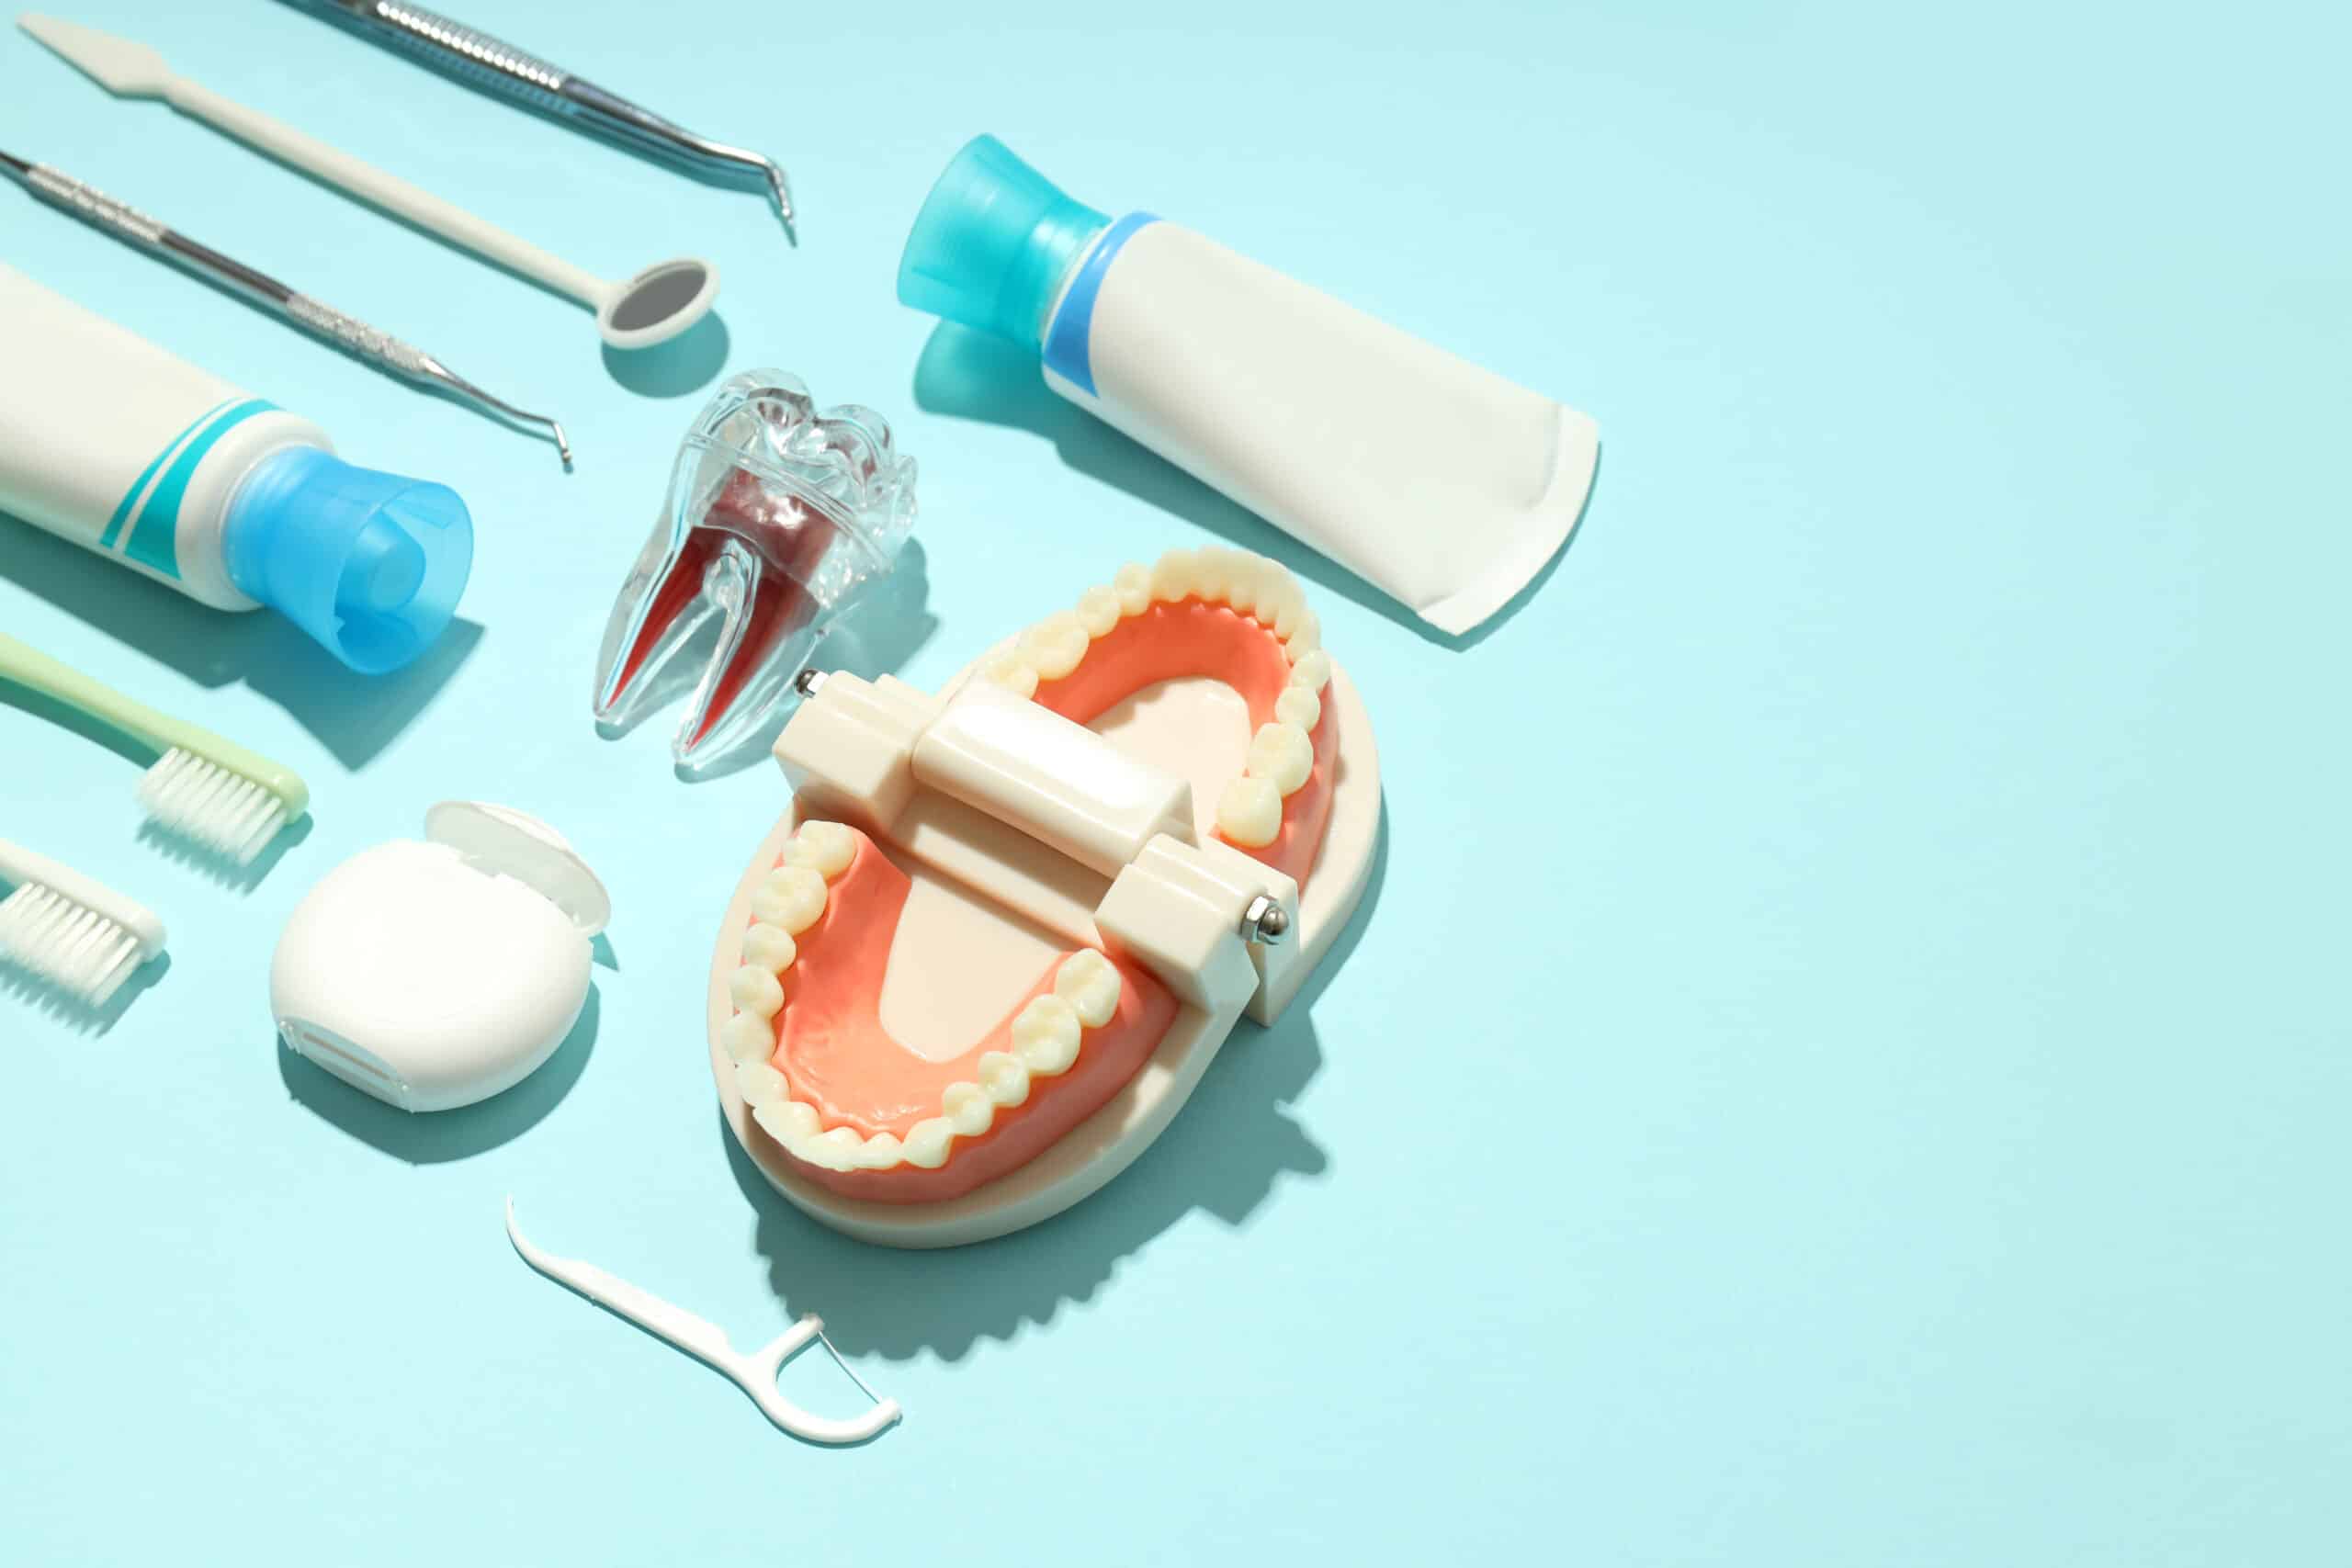 Maintain a radiant smile with our comprehensive teeth cleaning services and personalized oral hygiene recommendations.